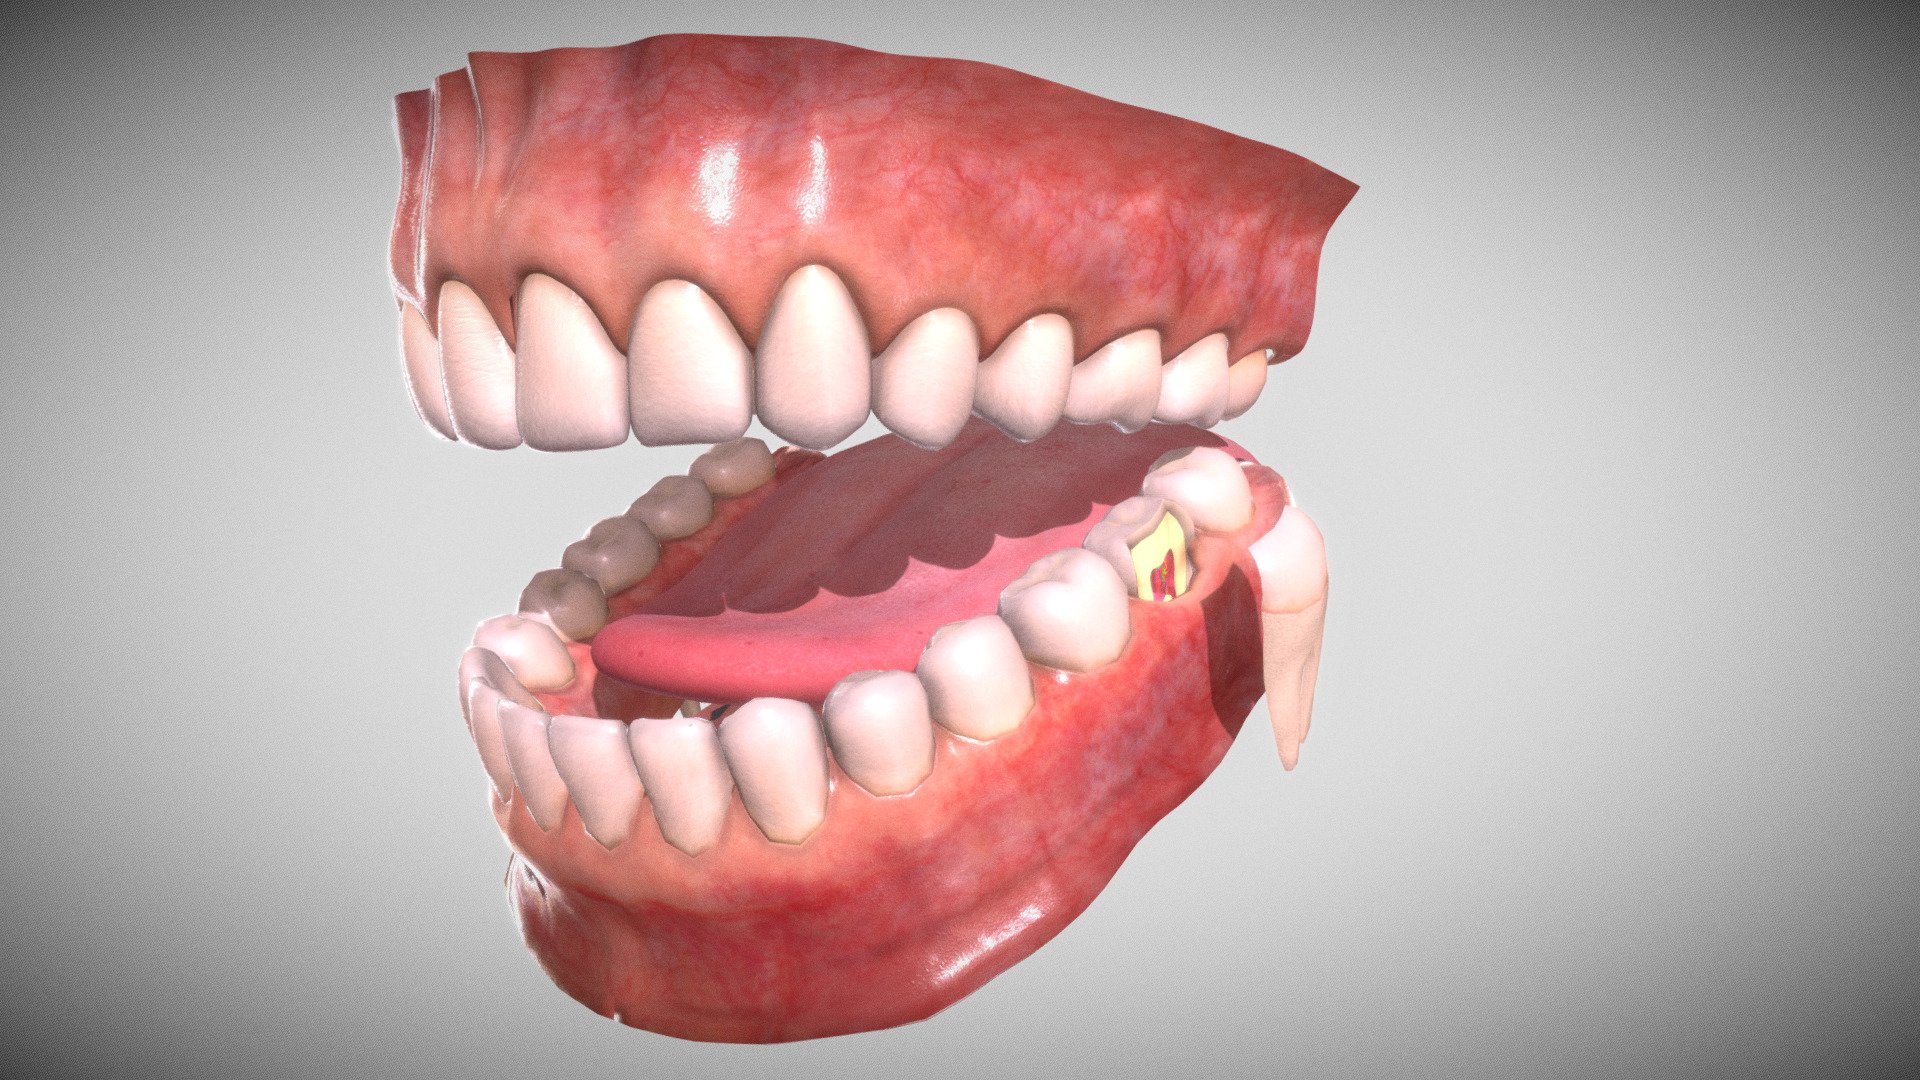 Teeth Denture gums and tongue cutted tooth